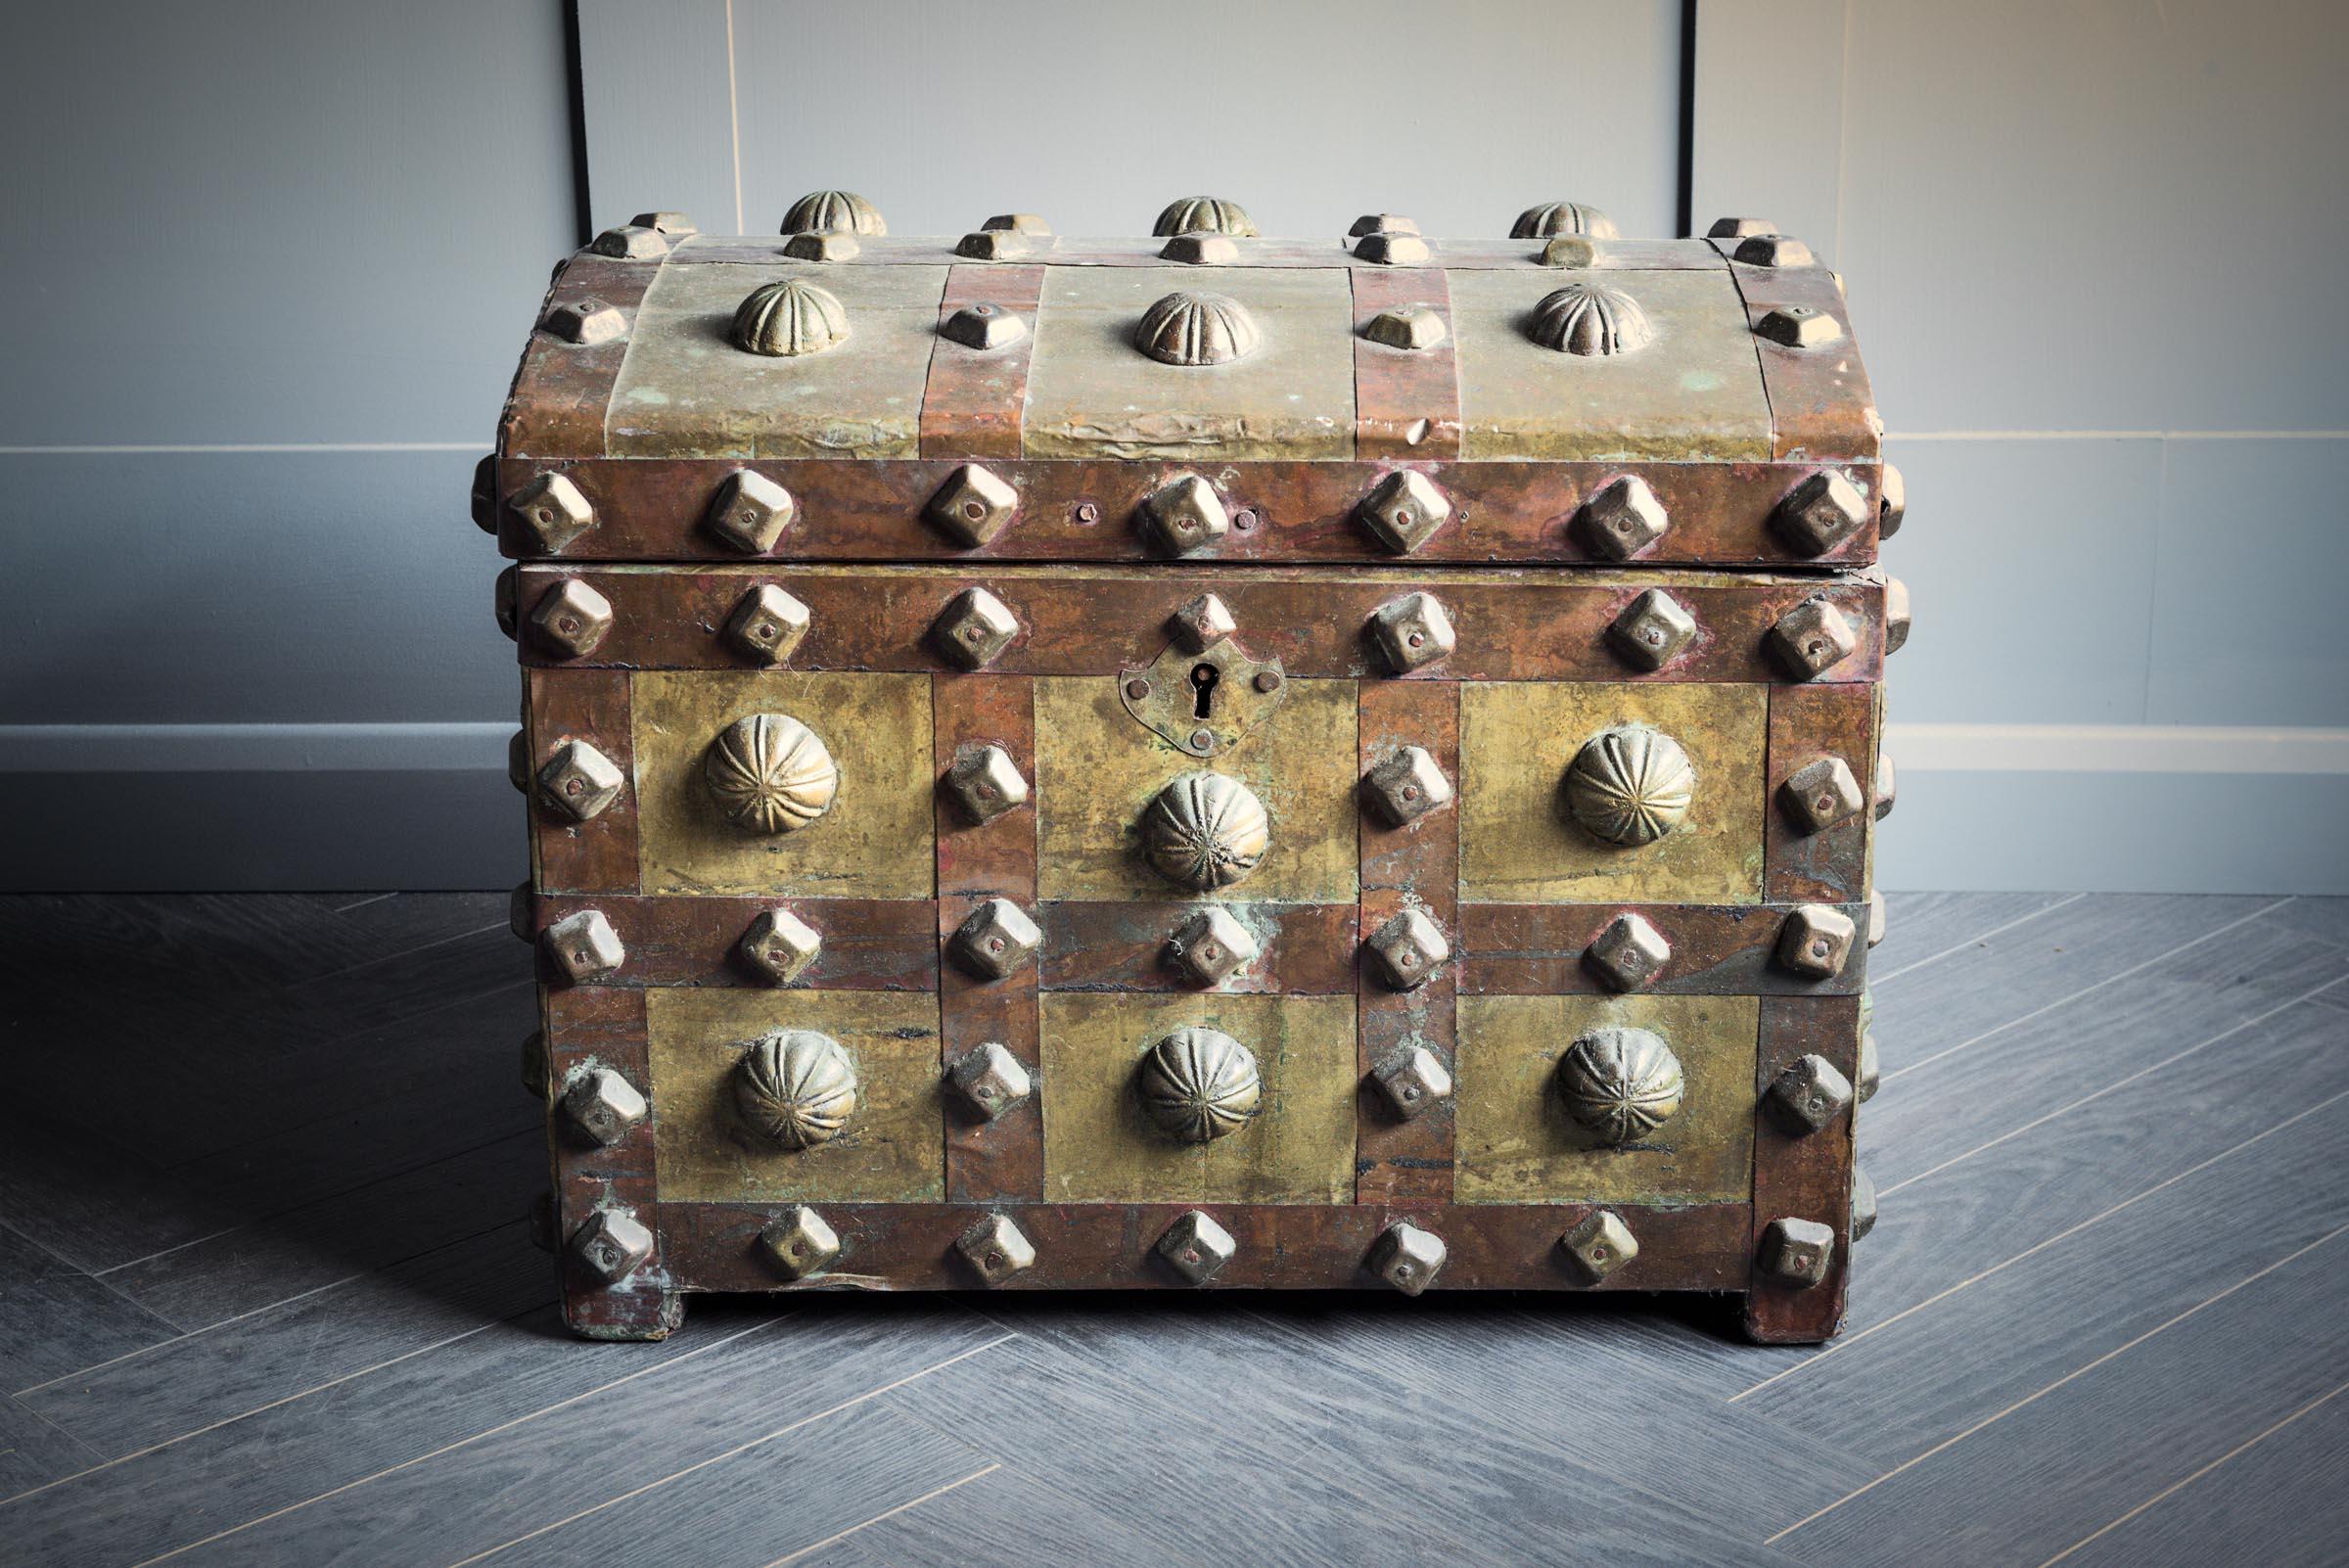 A medium sized Berber dowry chest of West African origin featuring bulbs of metal elaborately decorating the outside of the chest - The lid opens on two metal hinges to reveal a multi purpose compartment inside. This dowry chest is complete with the